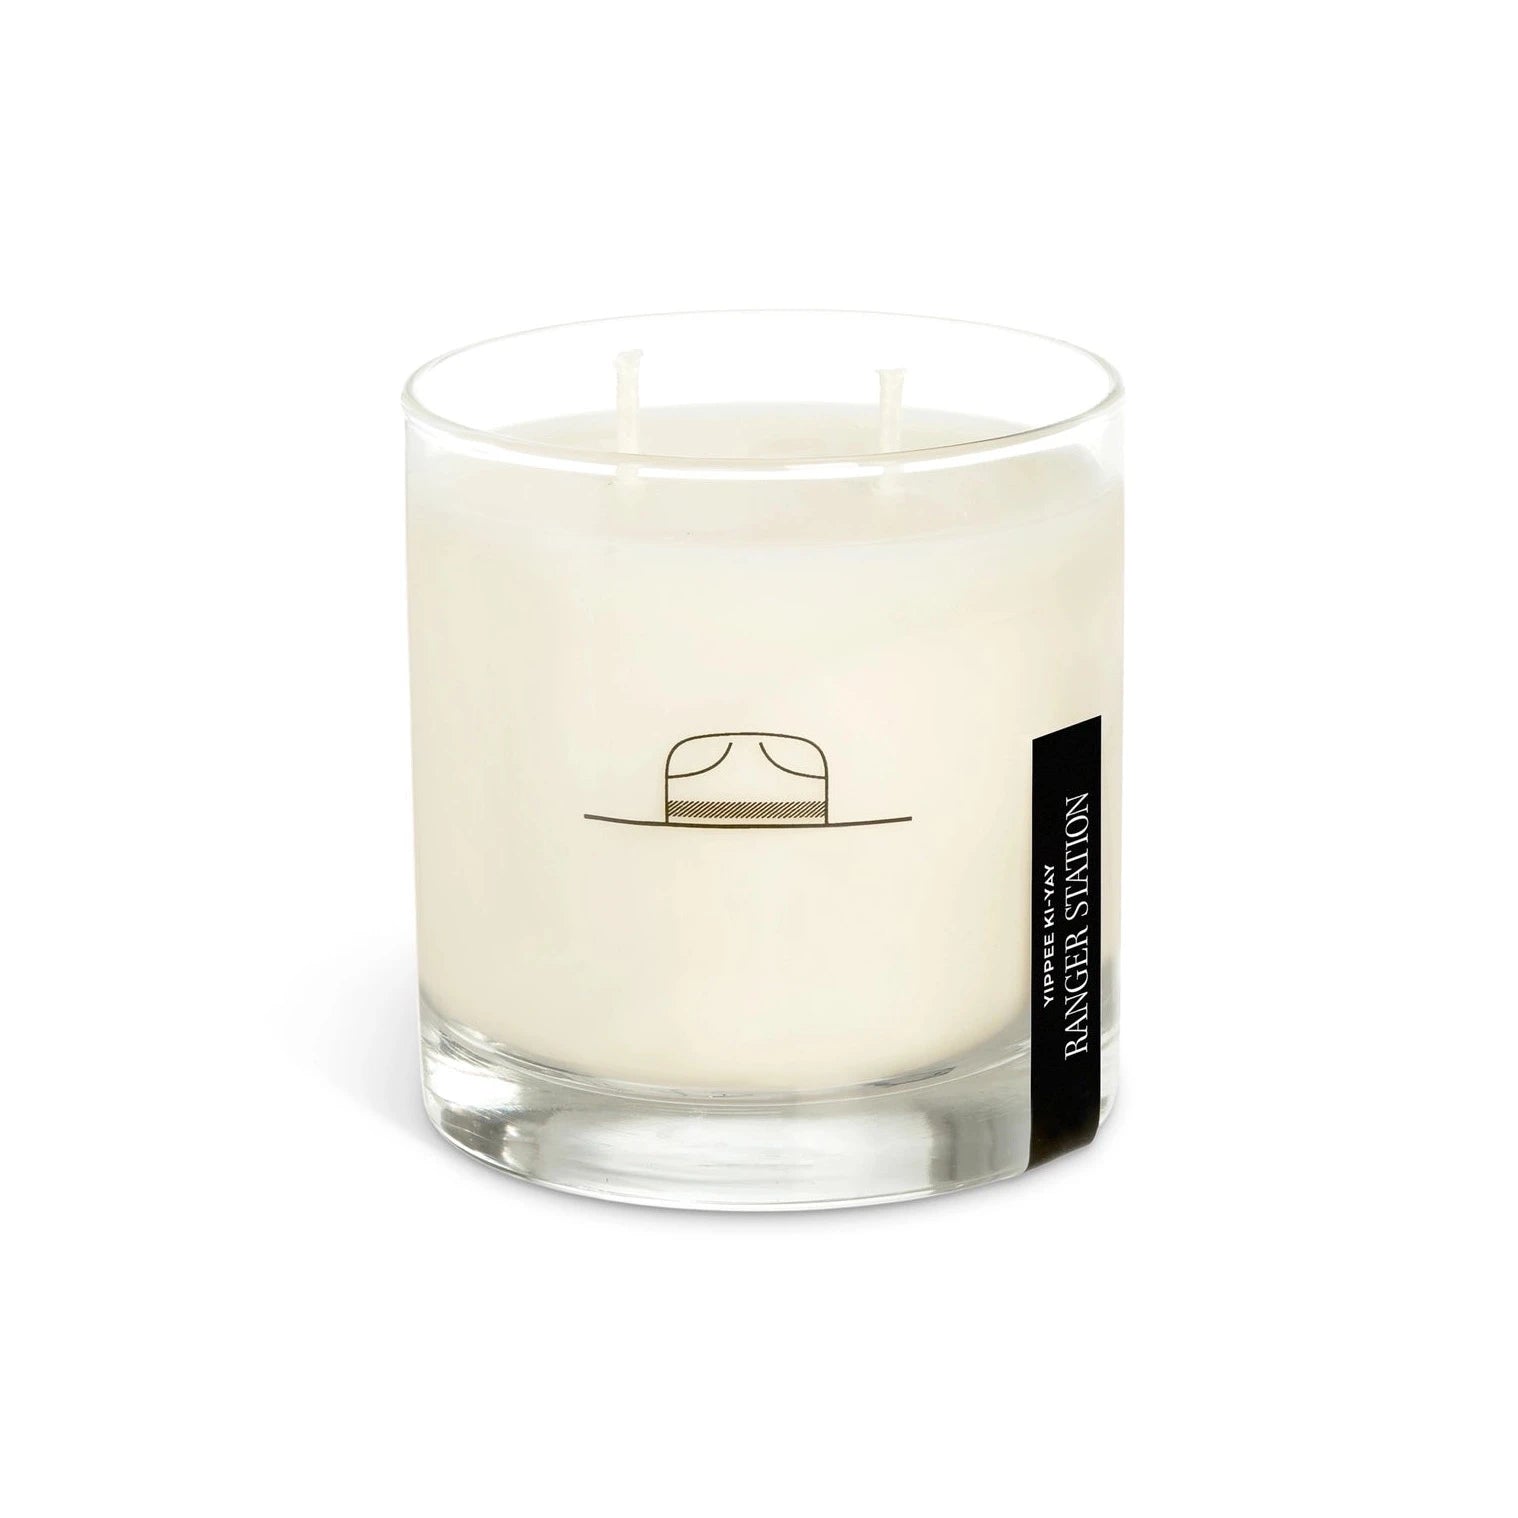 white candle with black illustration on it. on the right hand side is black sticker label